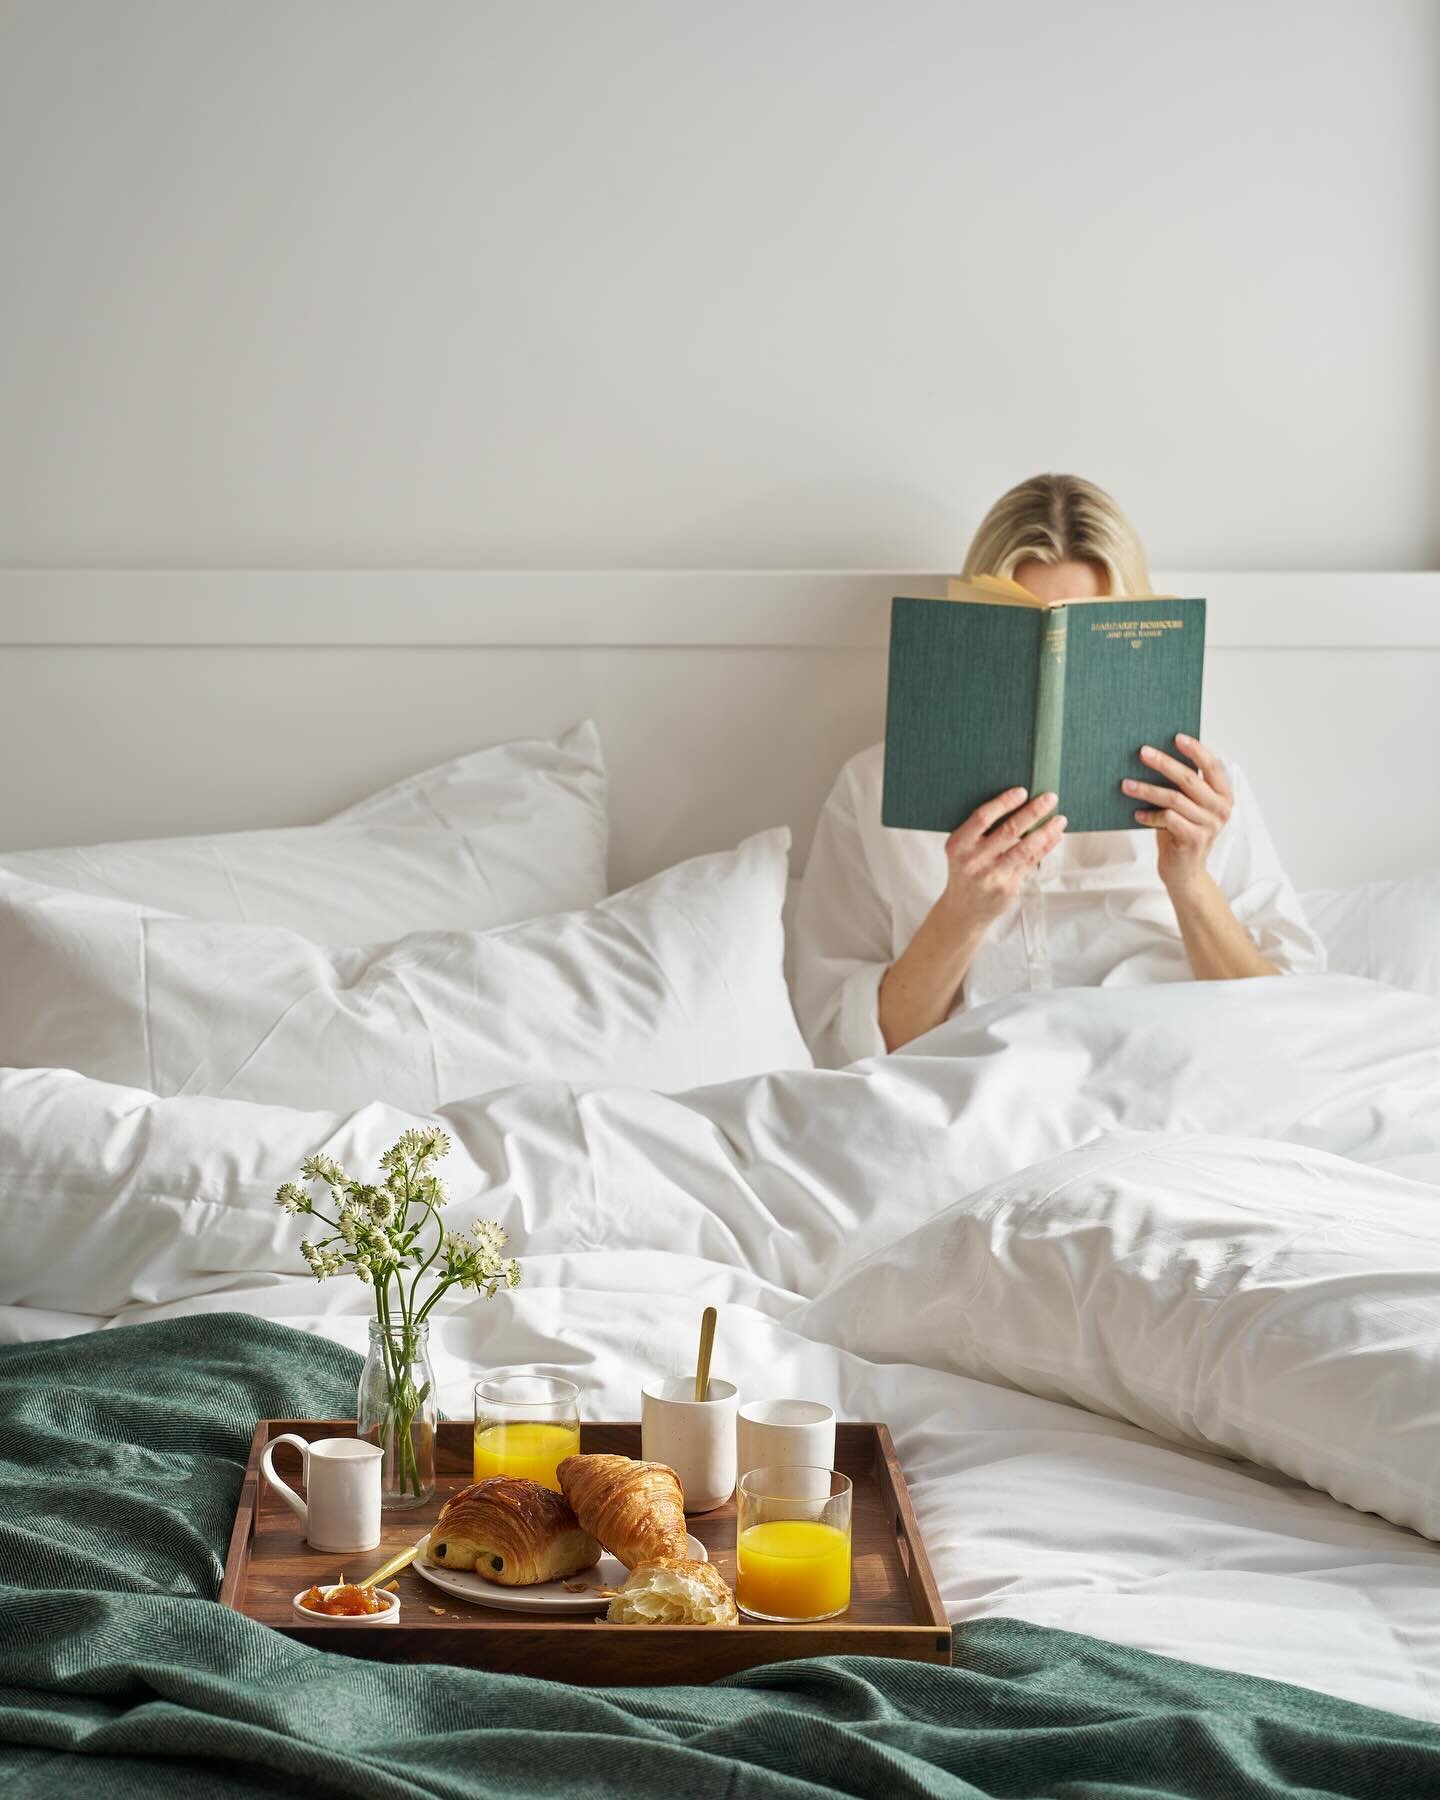 It&rsquo;s the #simplethings #breakfastinbed for @shopthenewt &hellip; styling and modelling @tokengerman #mothersday